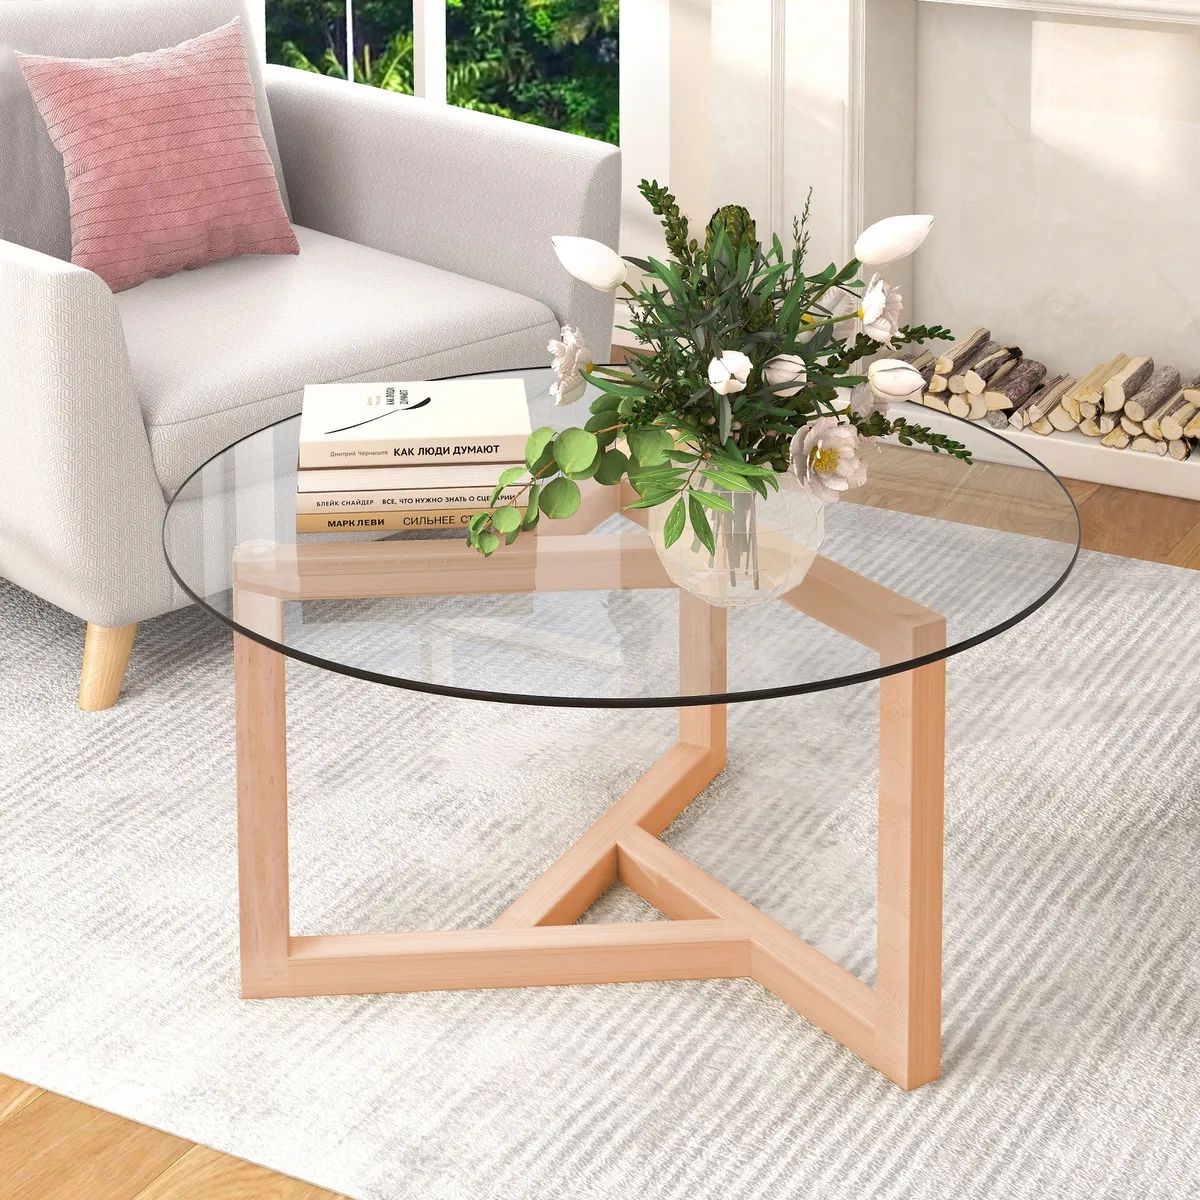 Habitrio Modern Round Glass Coffee Table Wood Base Furniture Living Room  Side | Ebay In Wood Tempered Glass Top Coffee Tables (View 4 of 15)